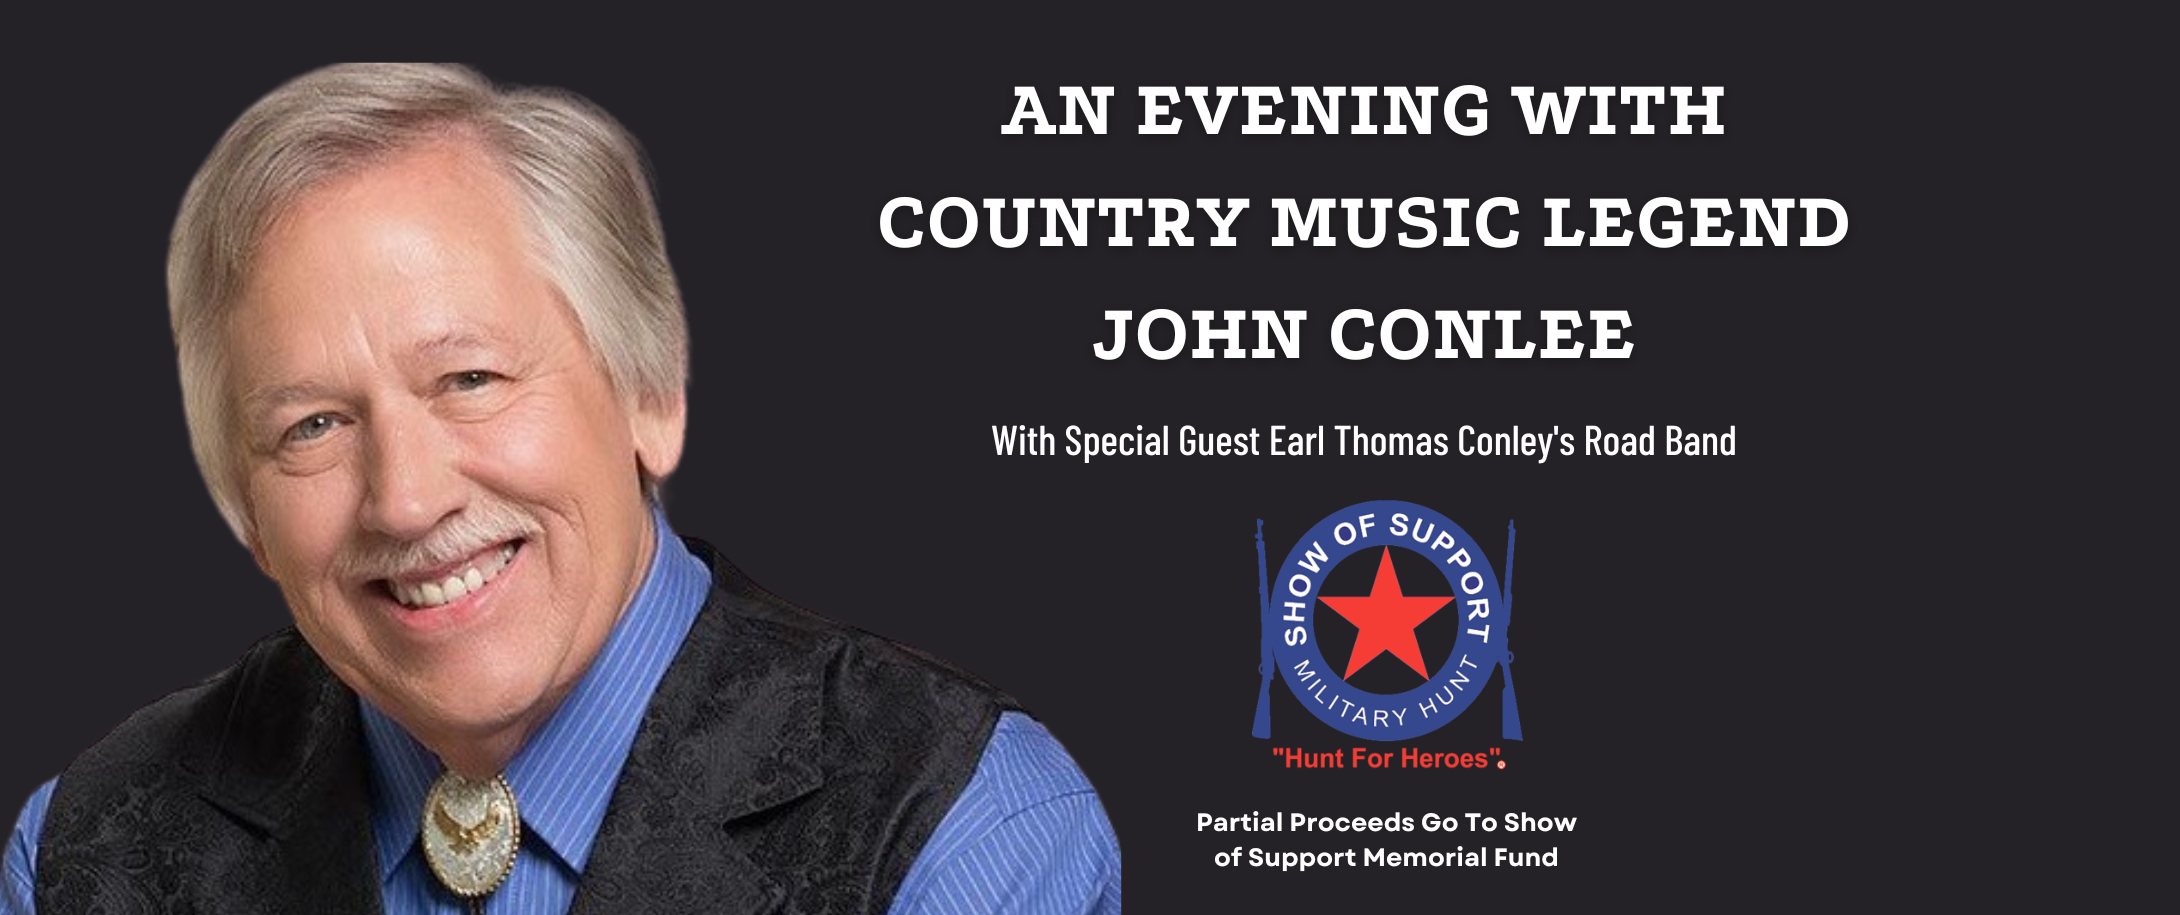 An Evening With Country Music Legend JOHN CONLEE 